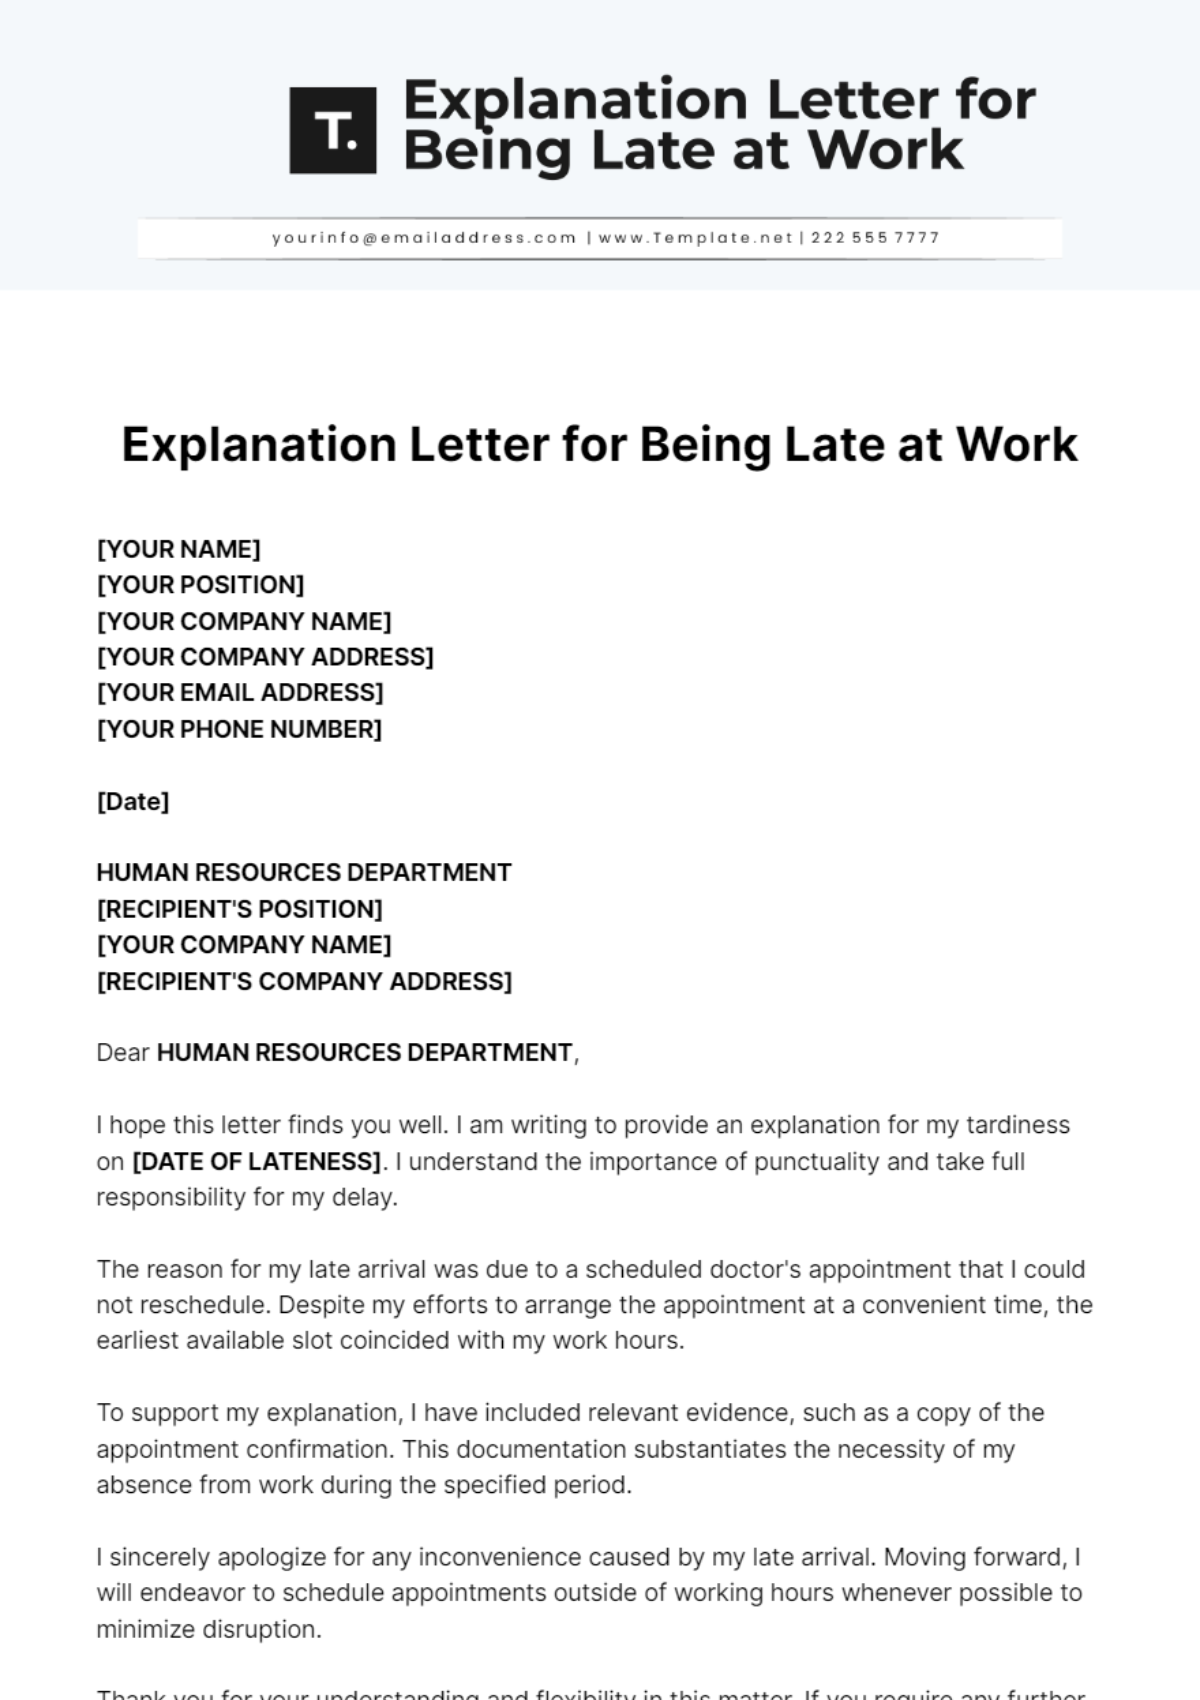  Explanation Letter For Being Late At Work Template